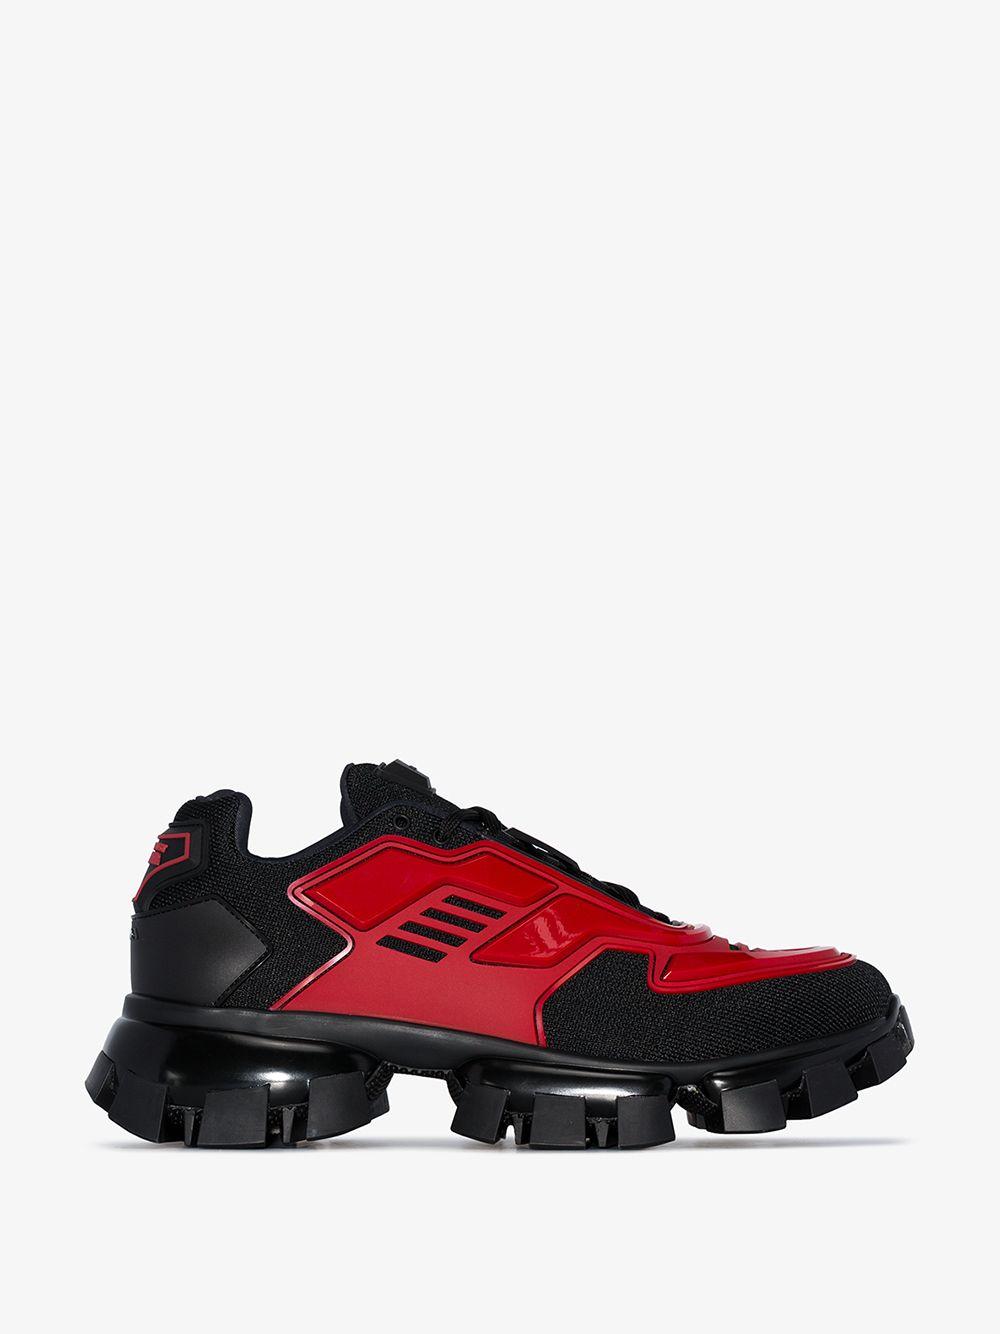 prada shoes red and black